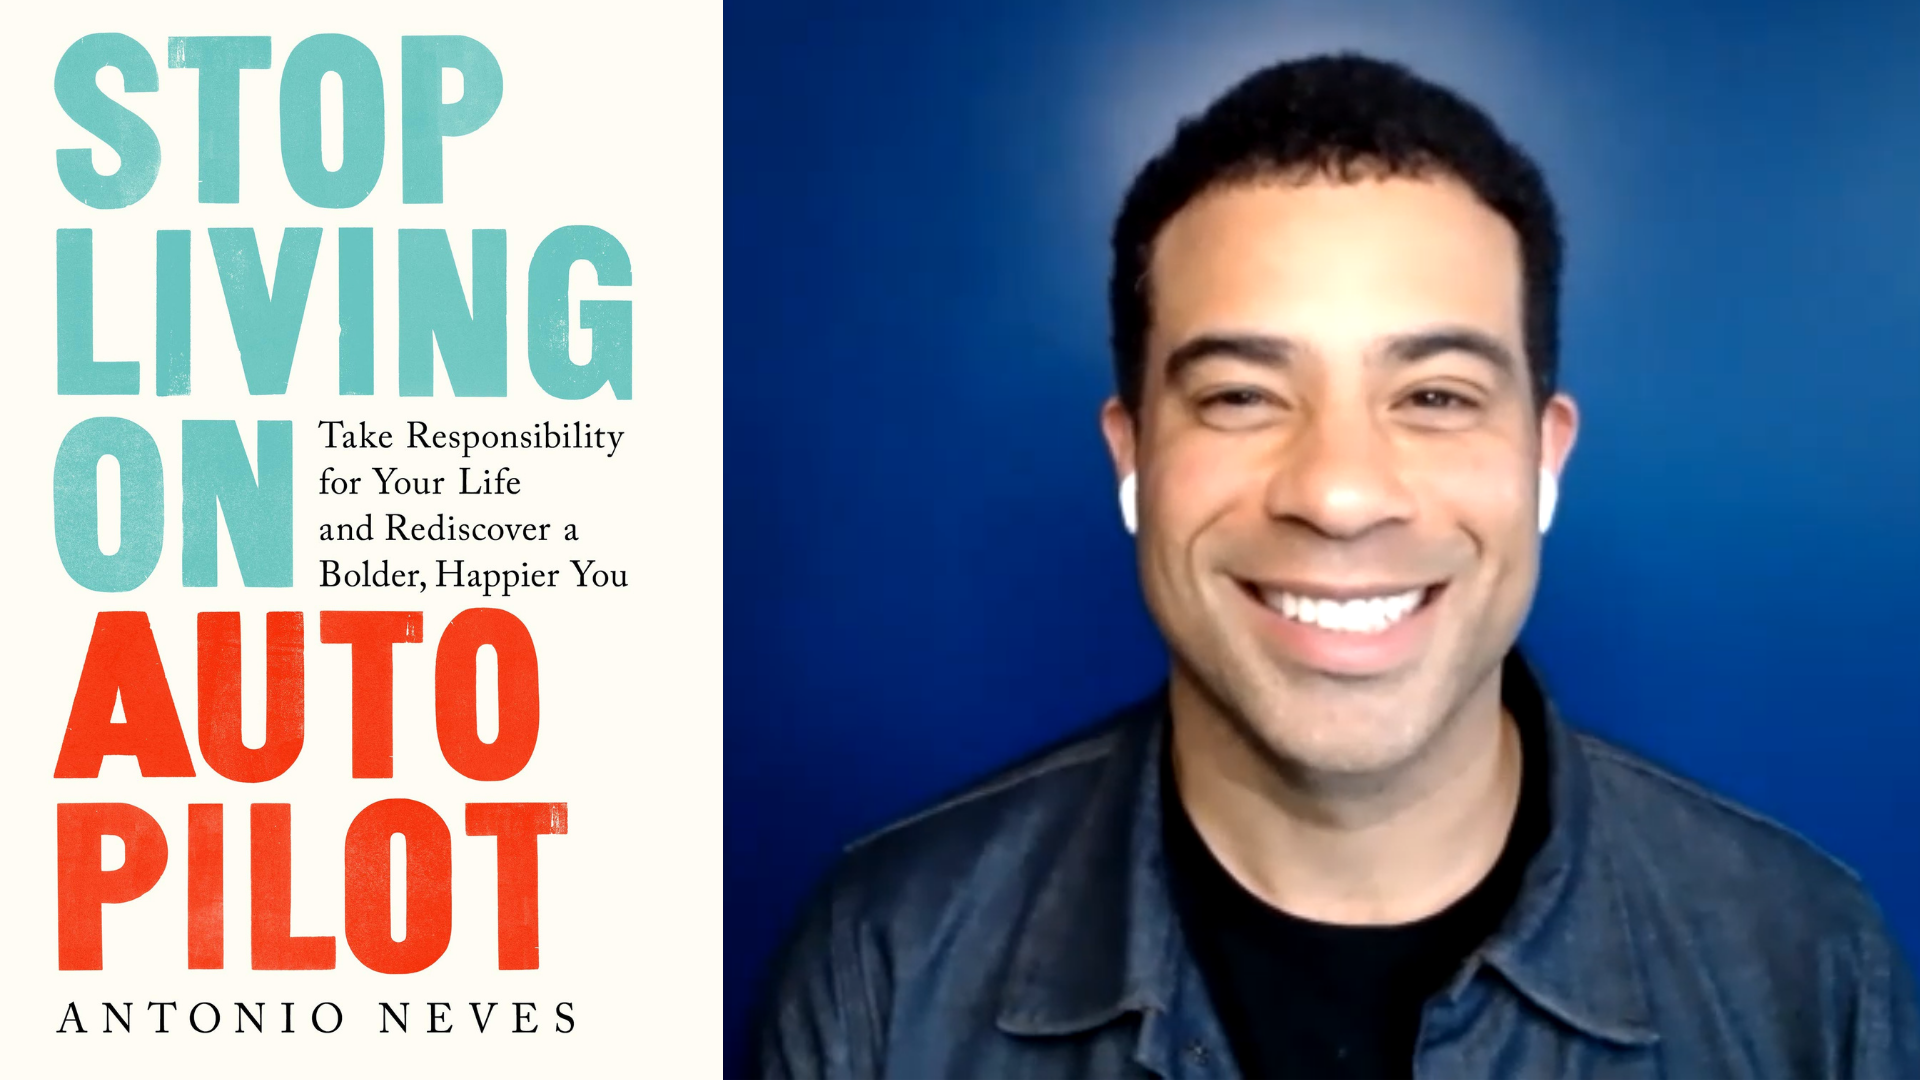 Author Antonio Neves talks about his book, "Stop Living on Autopilot" #newdaynw